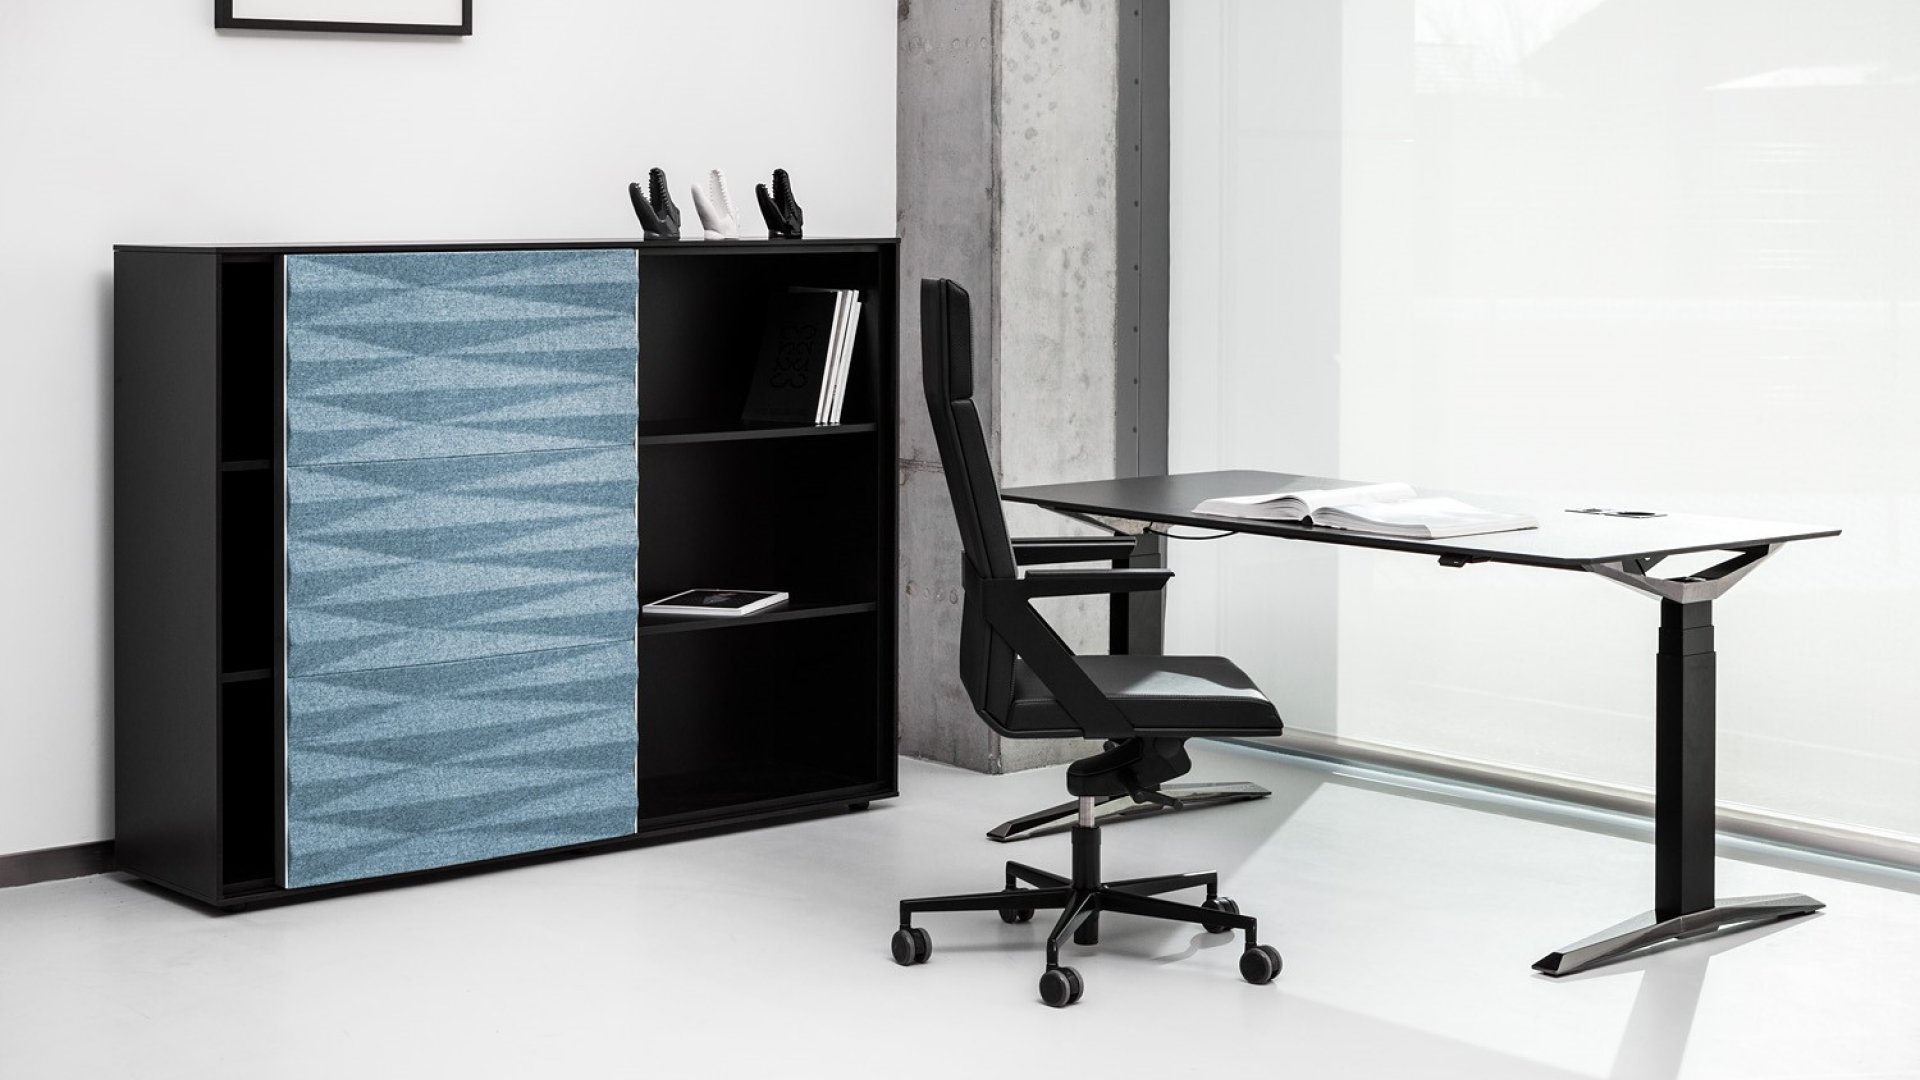 TOOR office cabinets